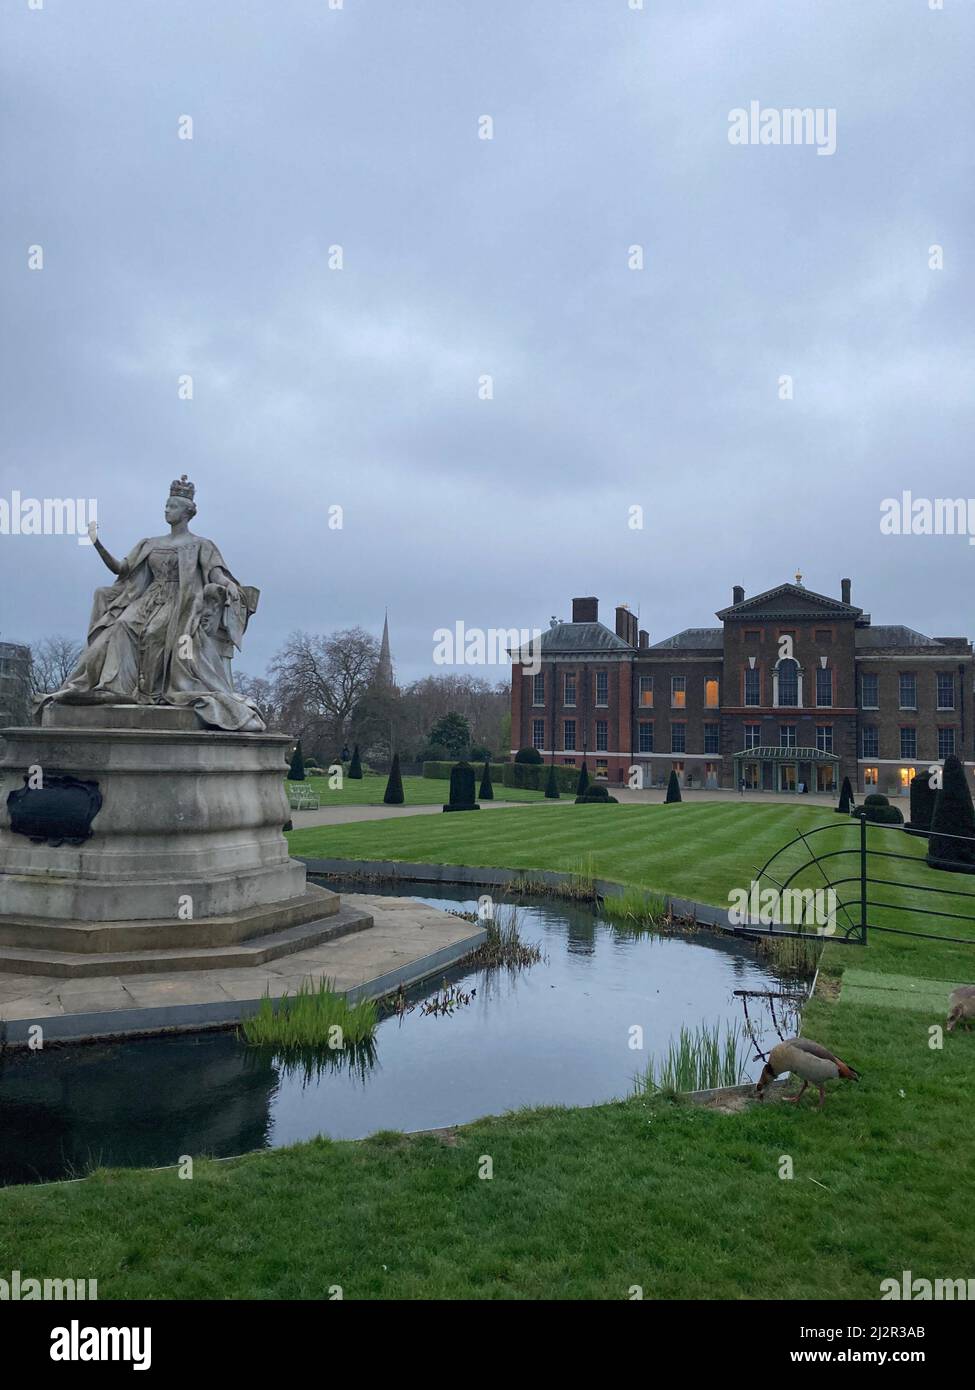 Statue of Queen Victoria in front of Kensington Palace on a cloudy day in Hyde Park, London Stock Photo